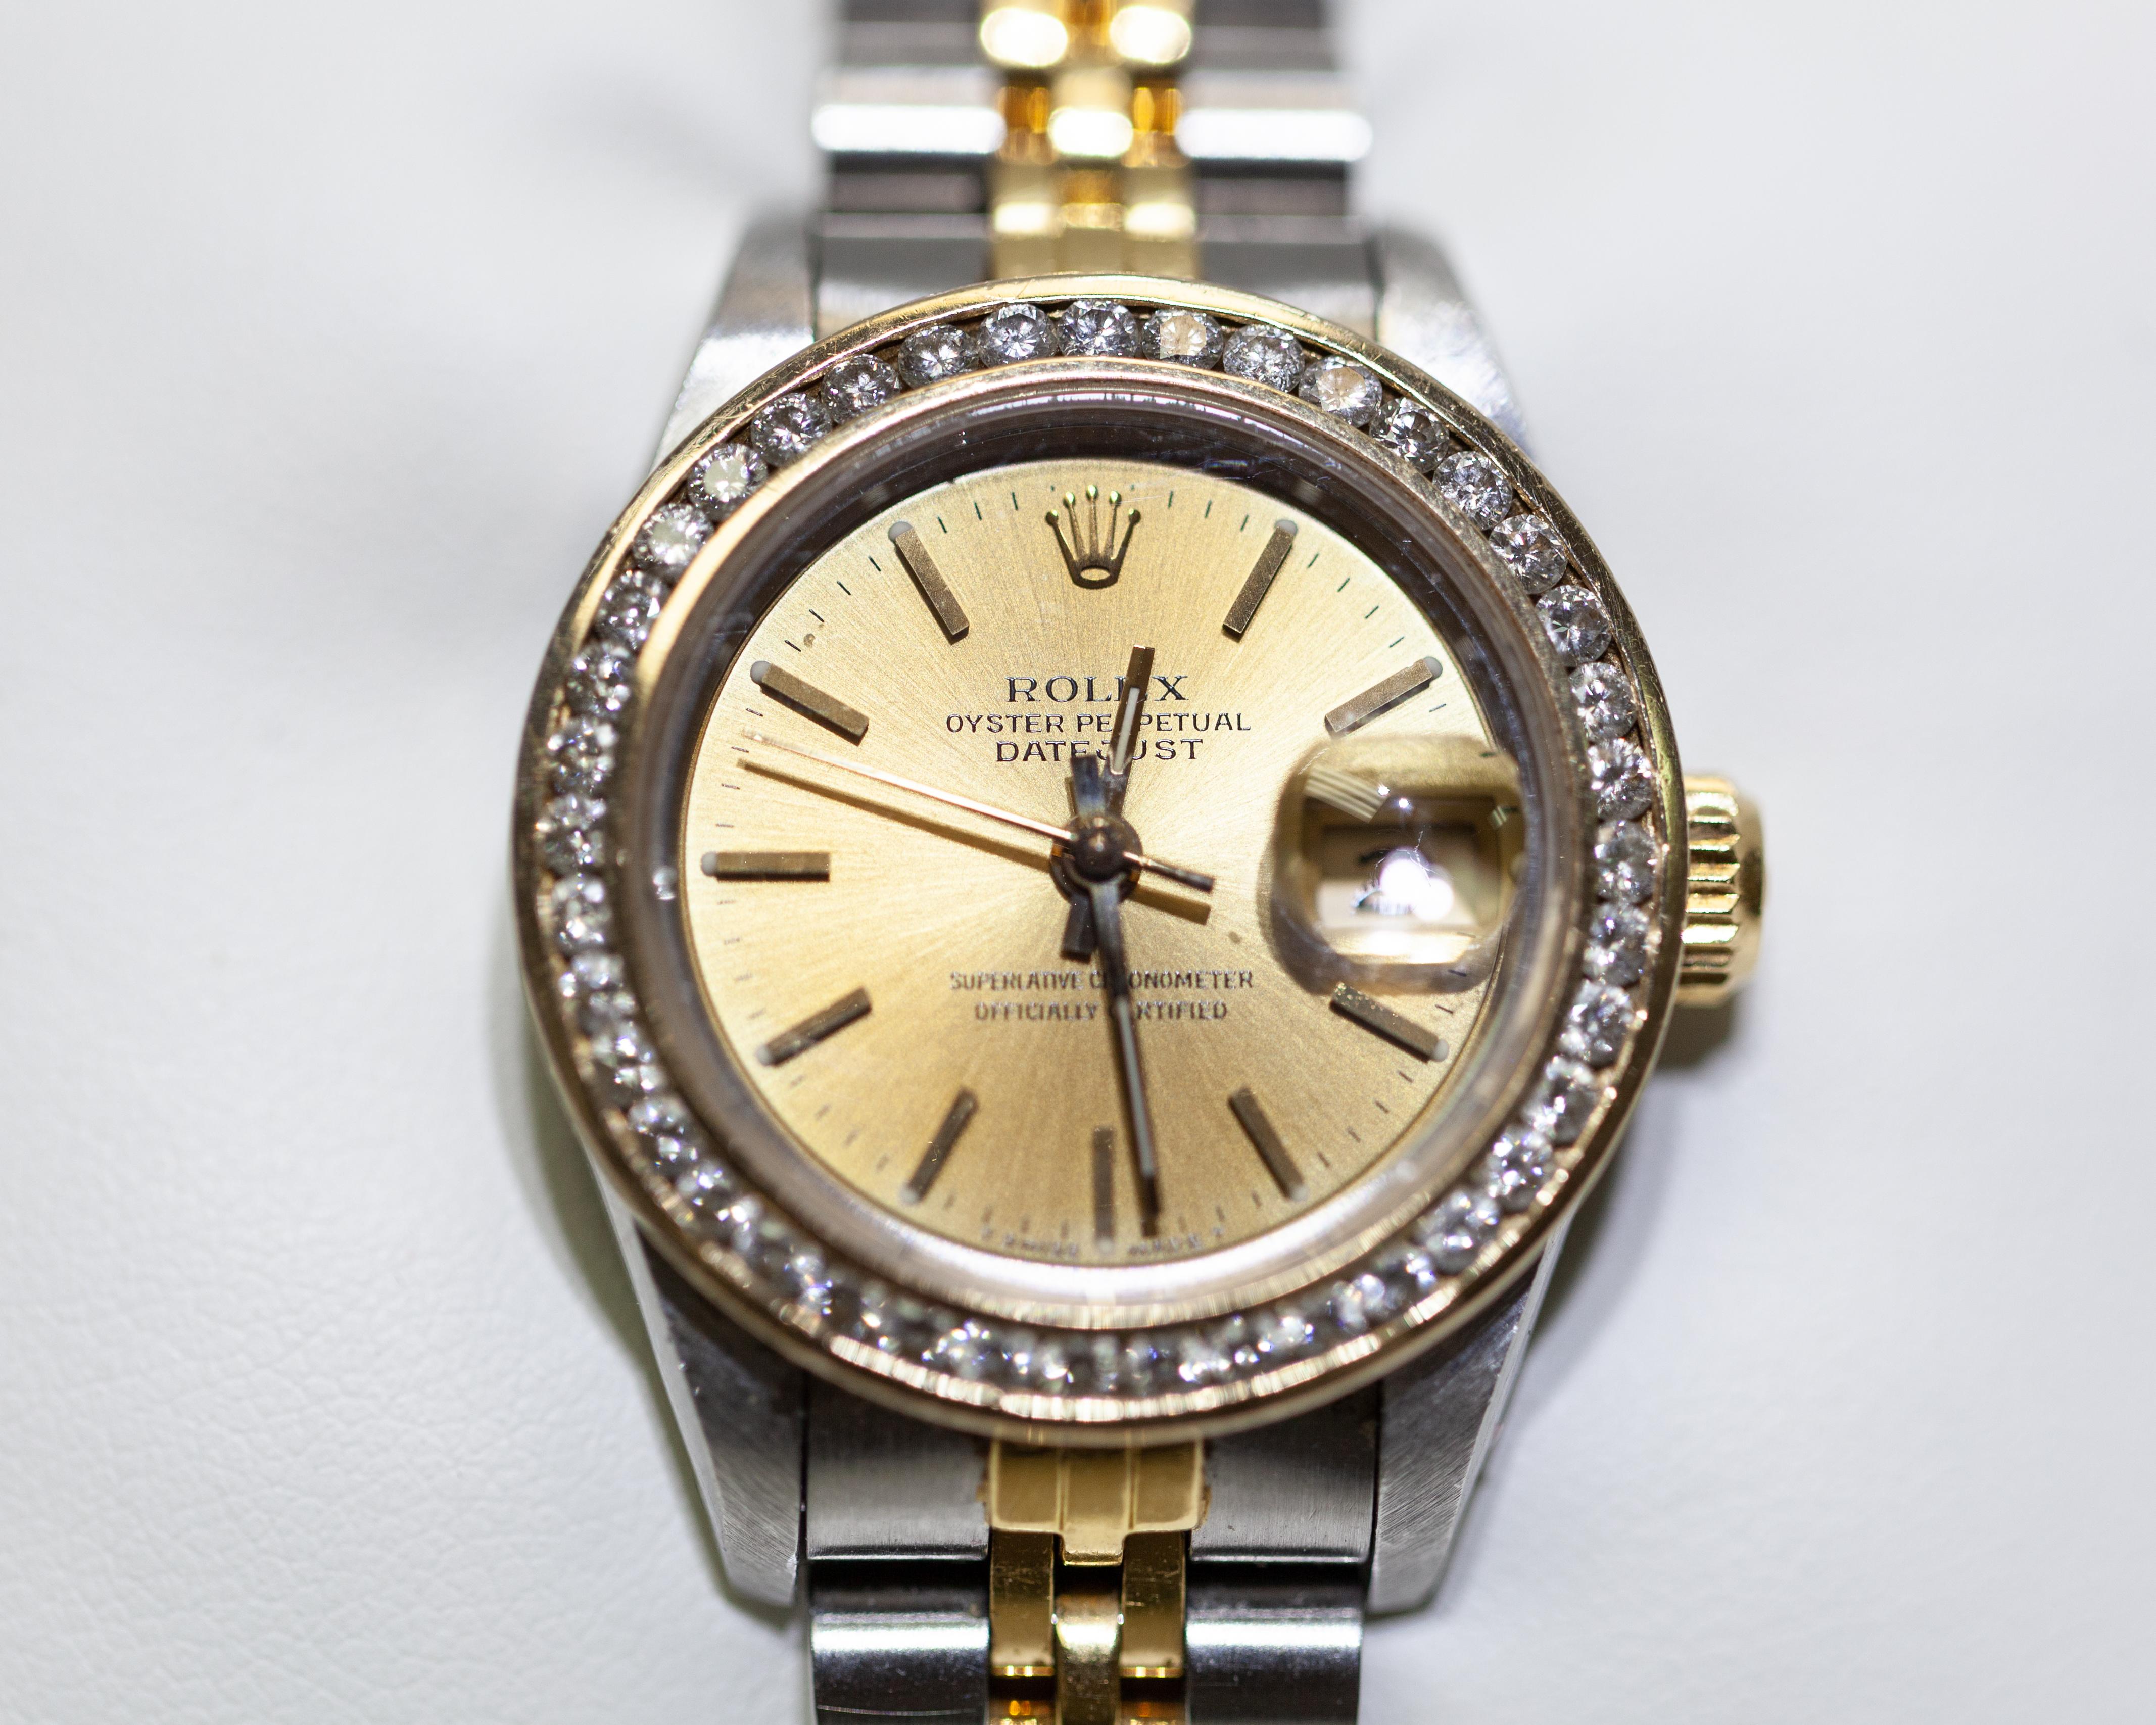 Basic Info 
Listing Number NB00023
Brand Rolex 
Model Datejust
Materials Stainless Steel & 18k Yellow Gold
Bracelet Style Jubilee
Dial Color Gold 
Bezel Fixed Aftermarket Diamonds 
Diamonds 0.03ct x 40=1.2ct total 
28mm Case Size Diameter 
Pre-owned